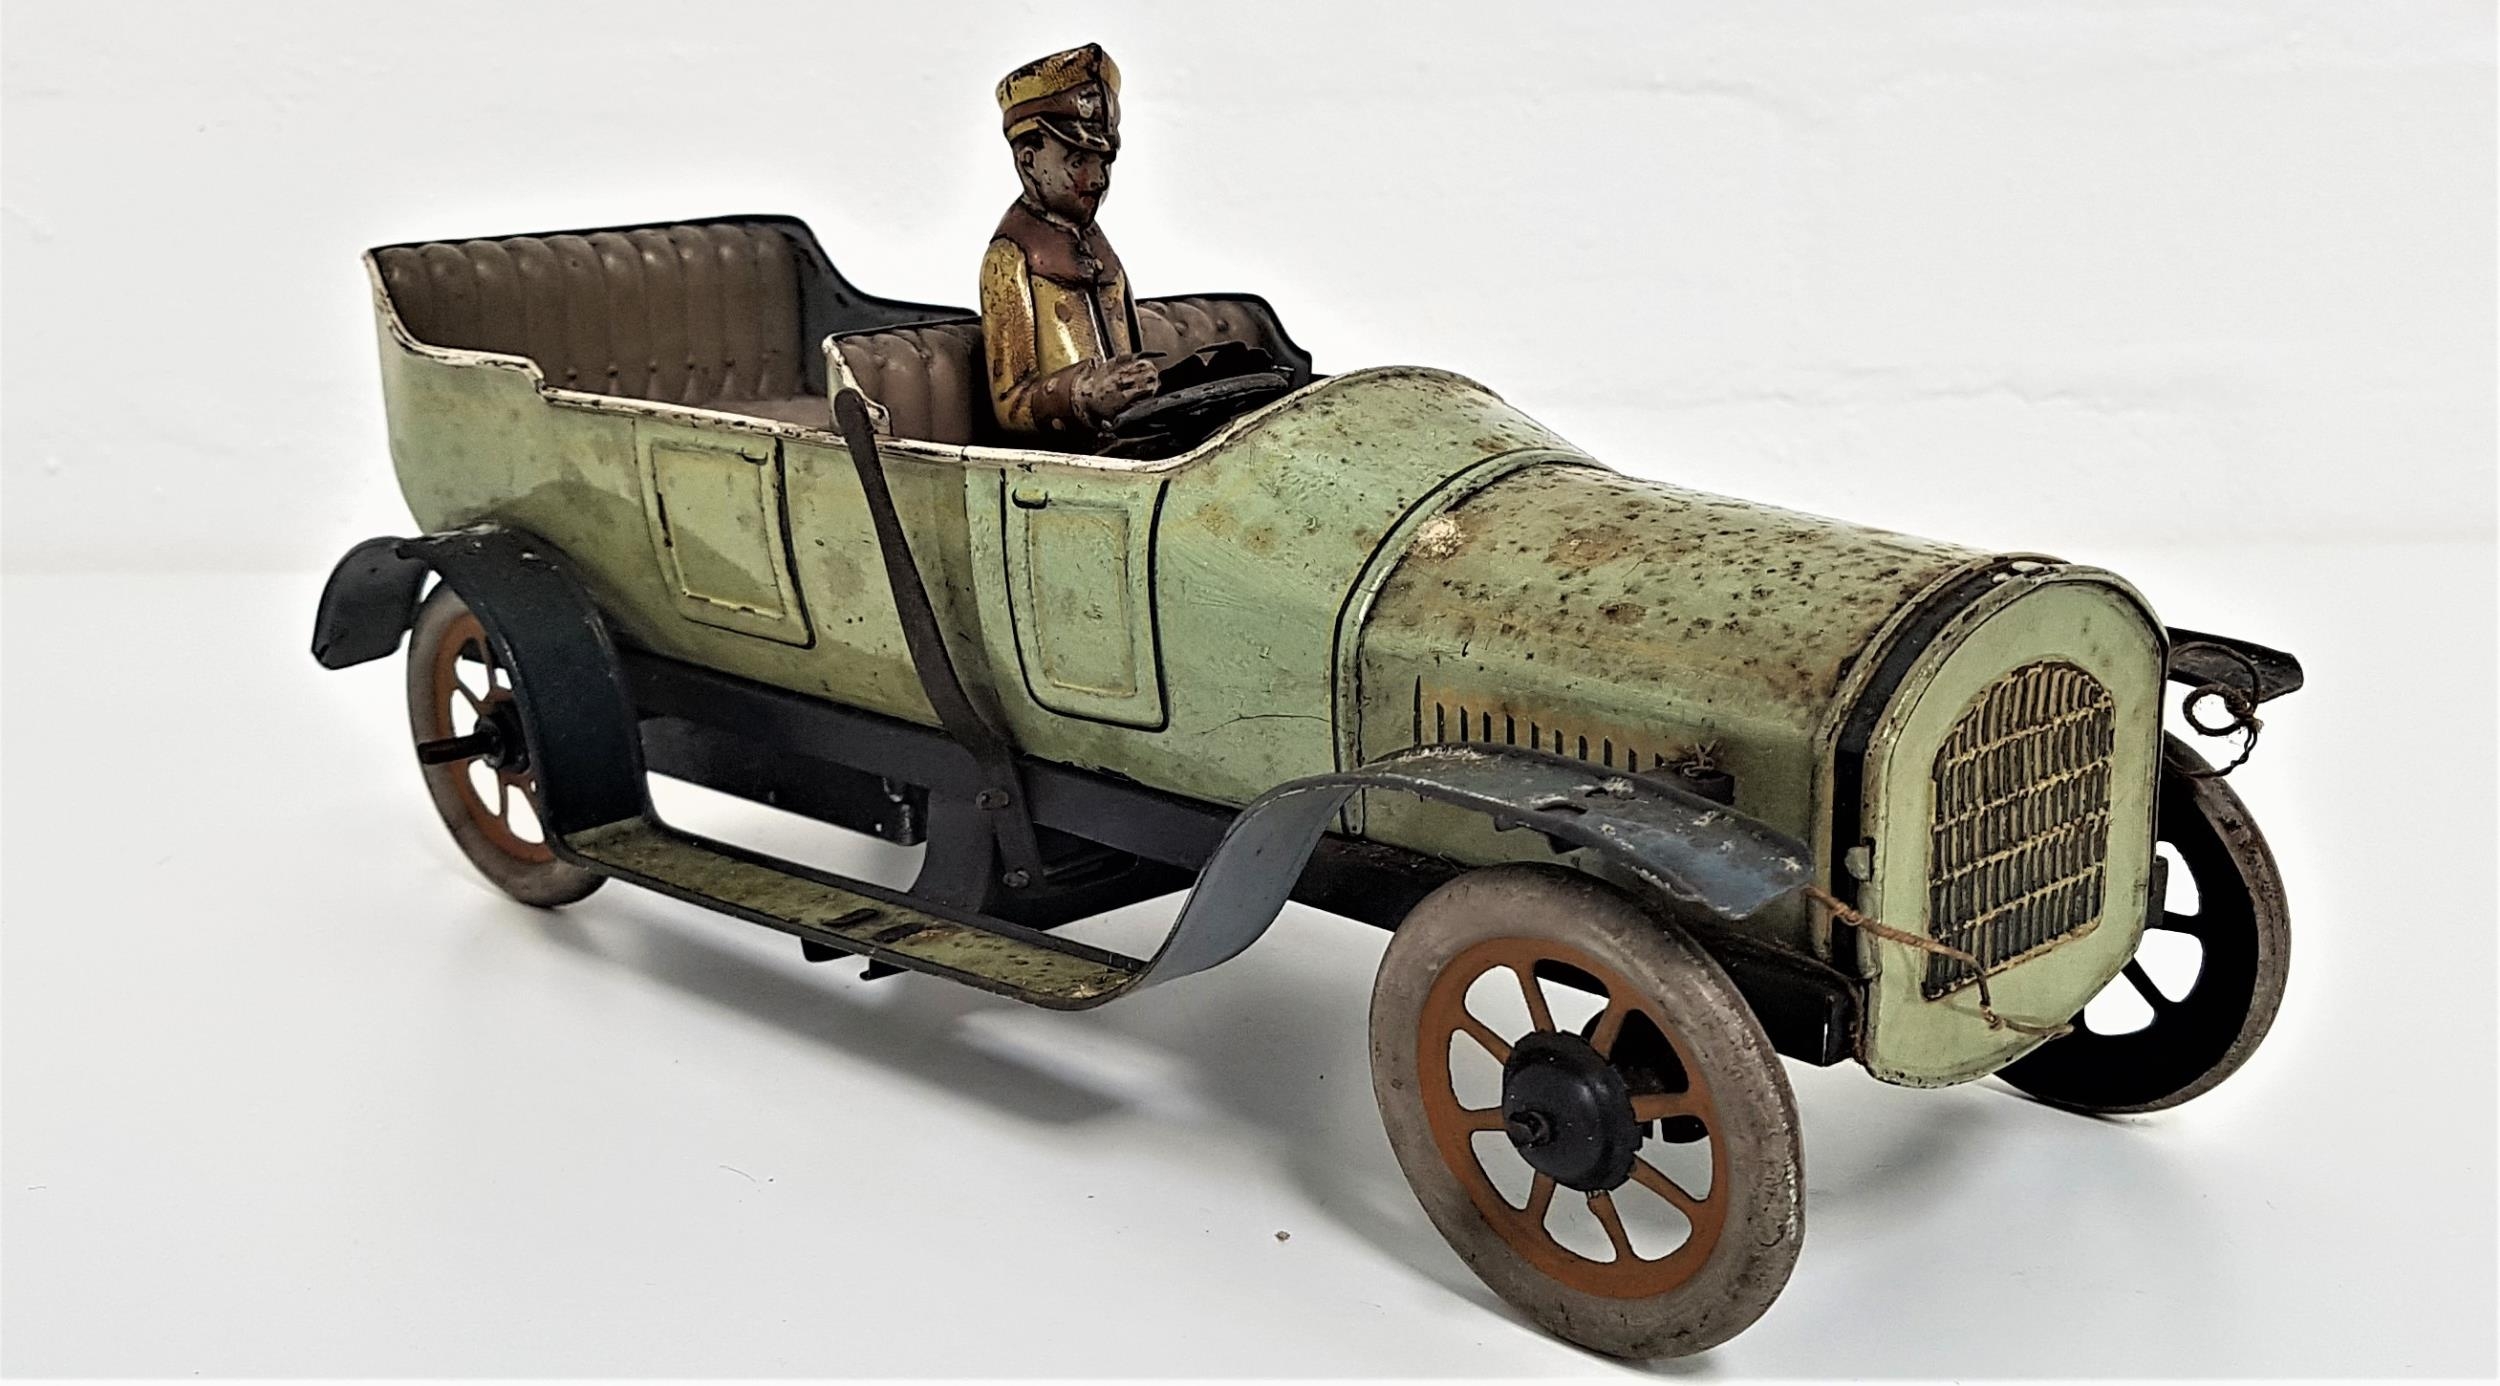 EARLY 20th CENTURY BING WERKE TIN PLATE OPEN TOP CAR in green livery with running boards and a